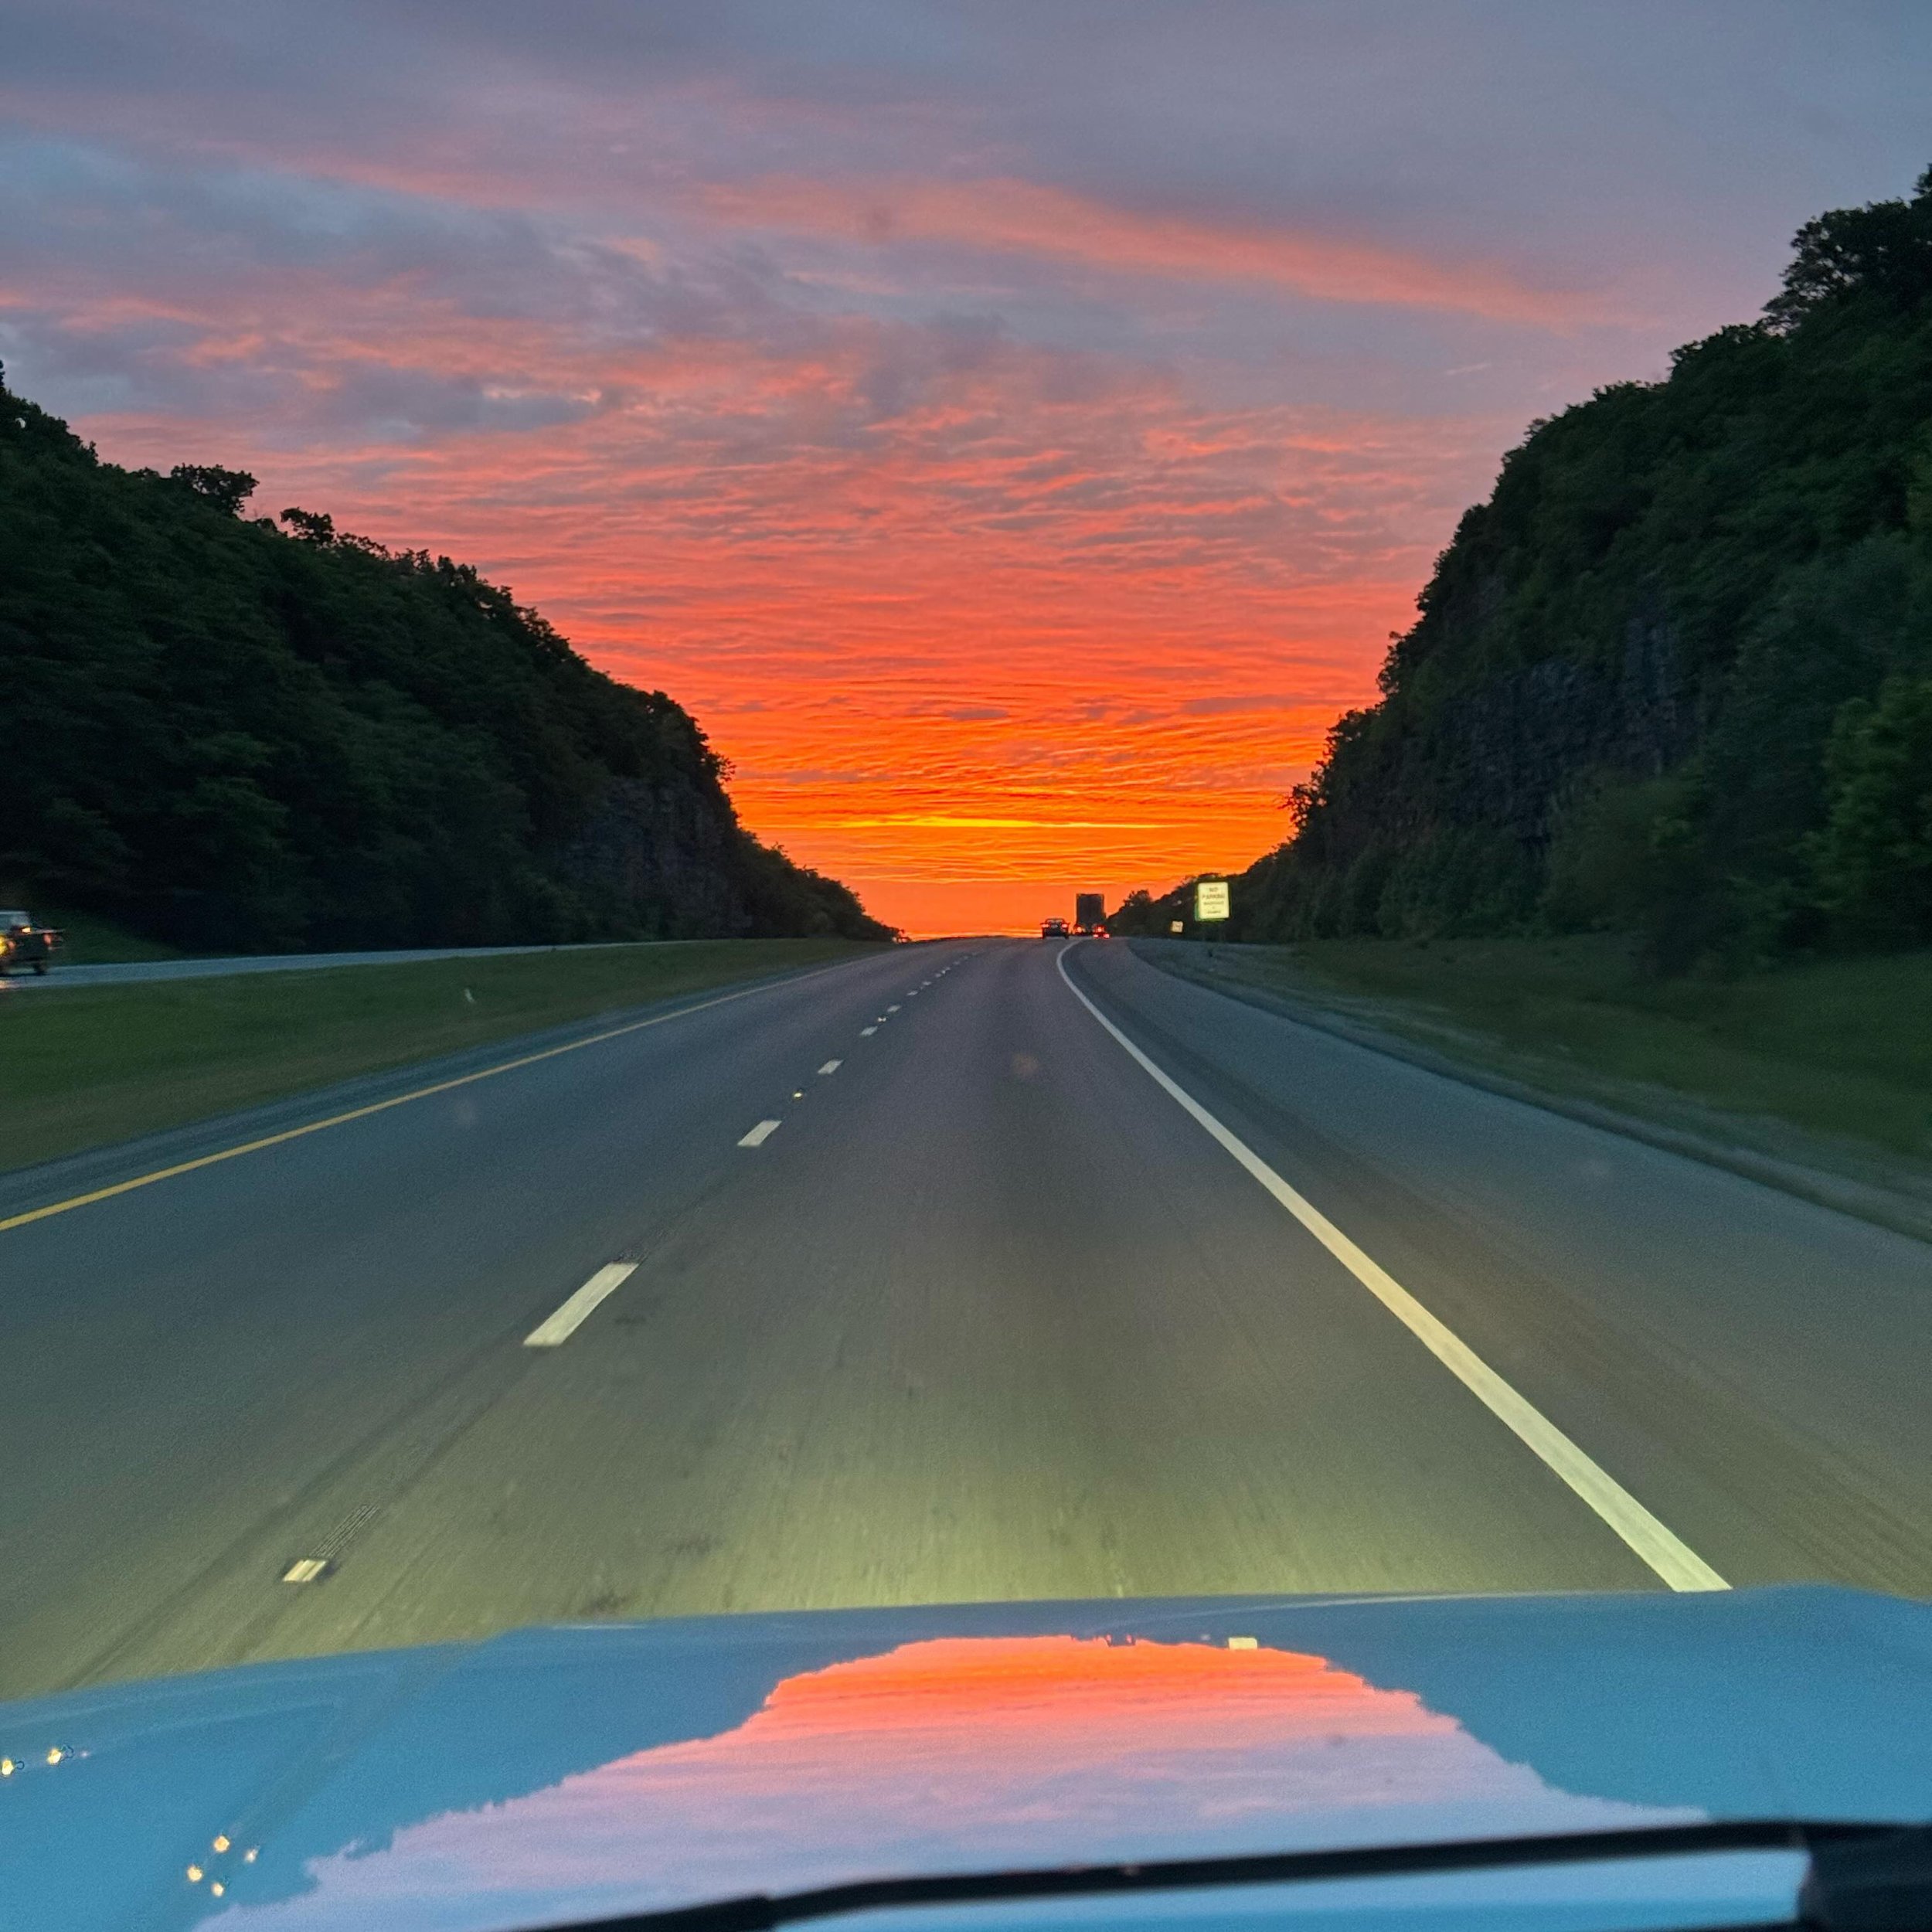 Beautiful Tennessee sunrise this morning heading east on 840. Quick down and back to ATL to pick up some equipment for the shop. Sure wish I was picking up something aircooled instead! Thank you TN for the view 🌄
&bull;
&bull;
&bull;
#TN #Sunrise #V